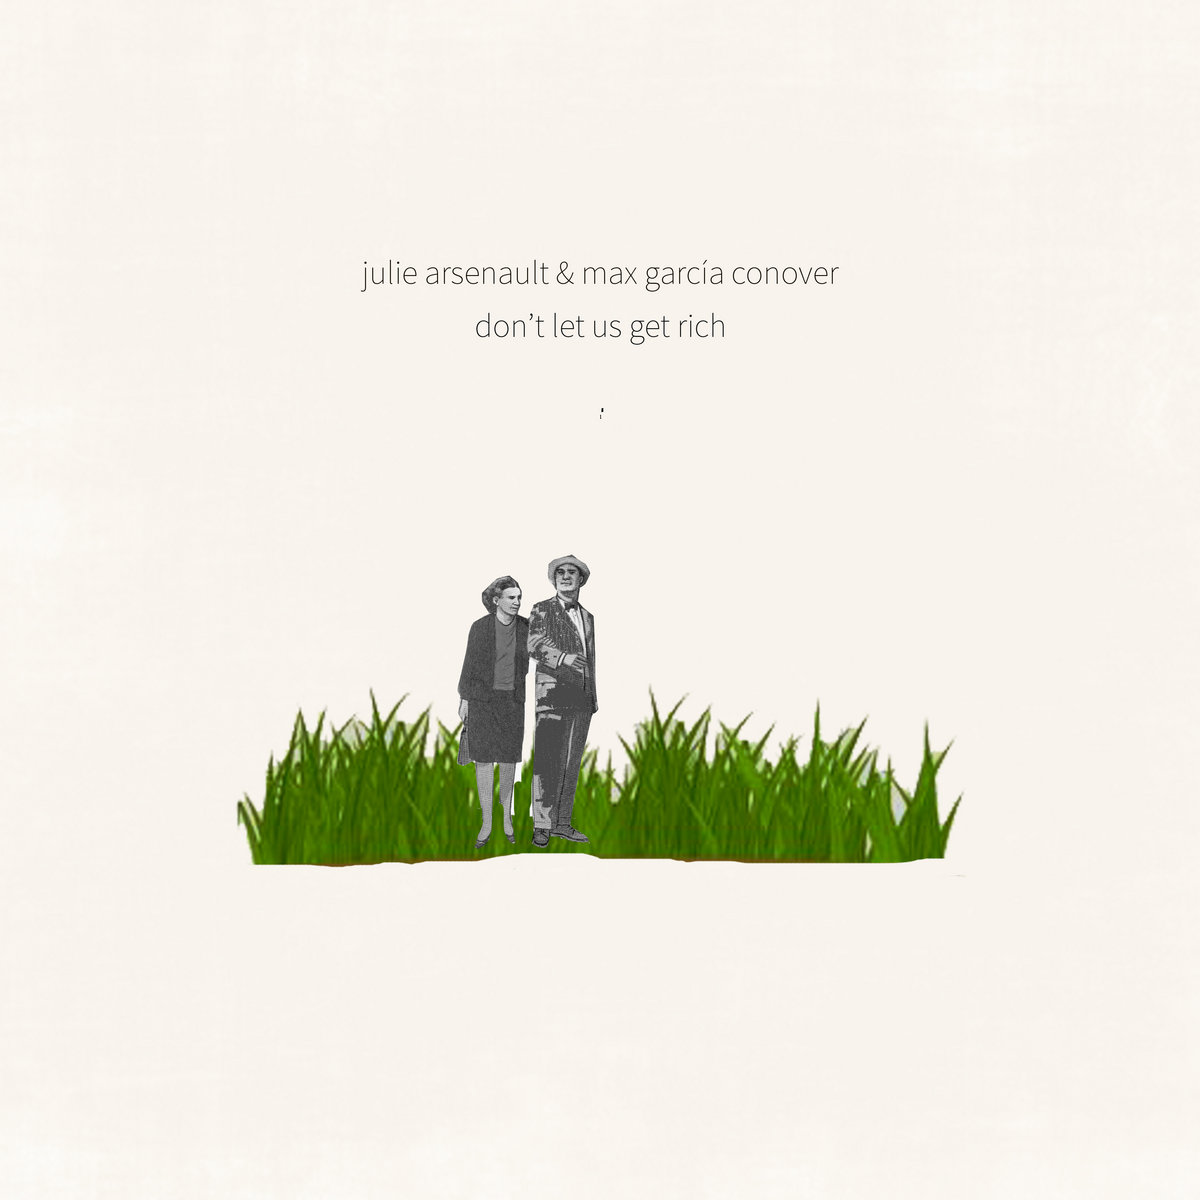 A man and a woman pictured in black and white, standing in green grass against an off white background with the text Don't Let Us Get Rich, Julie Arsenault & Max García Conover